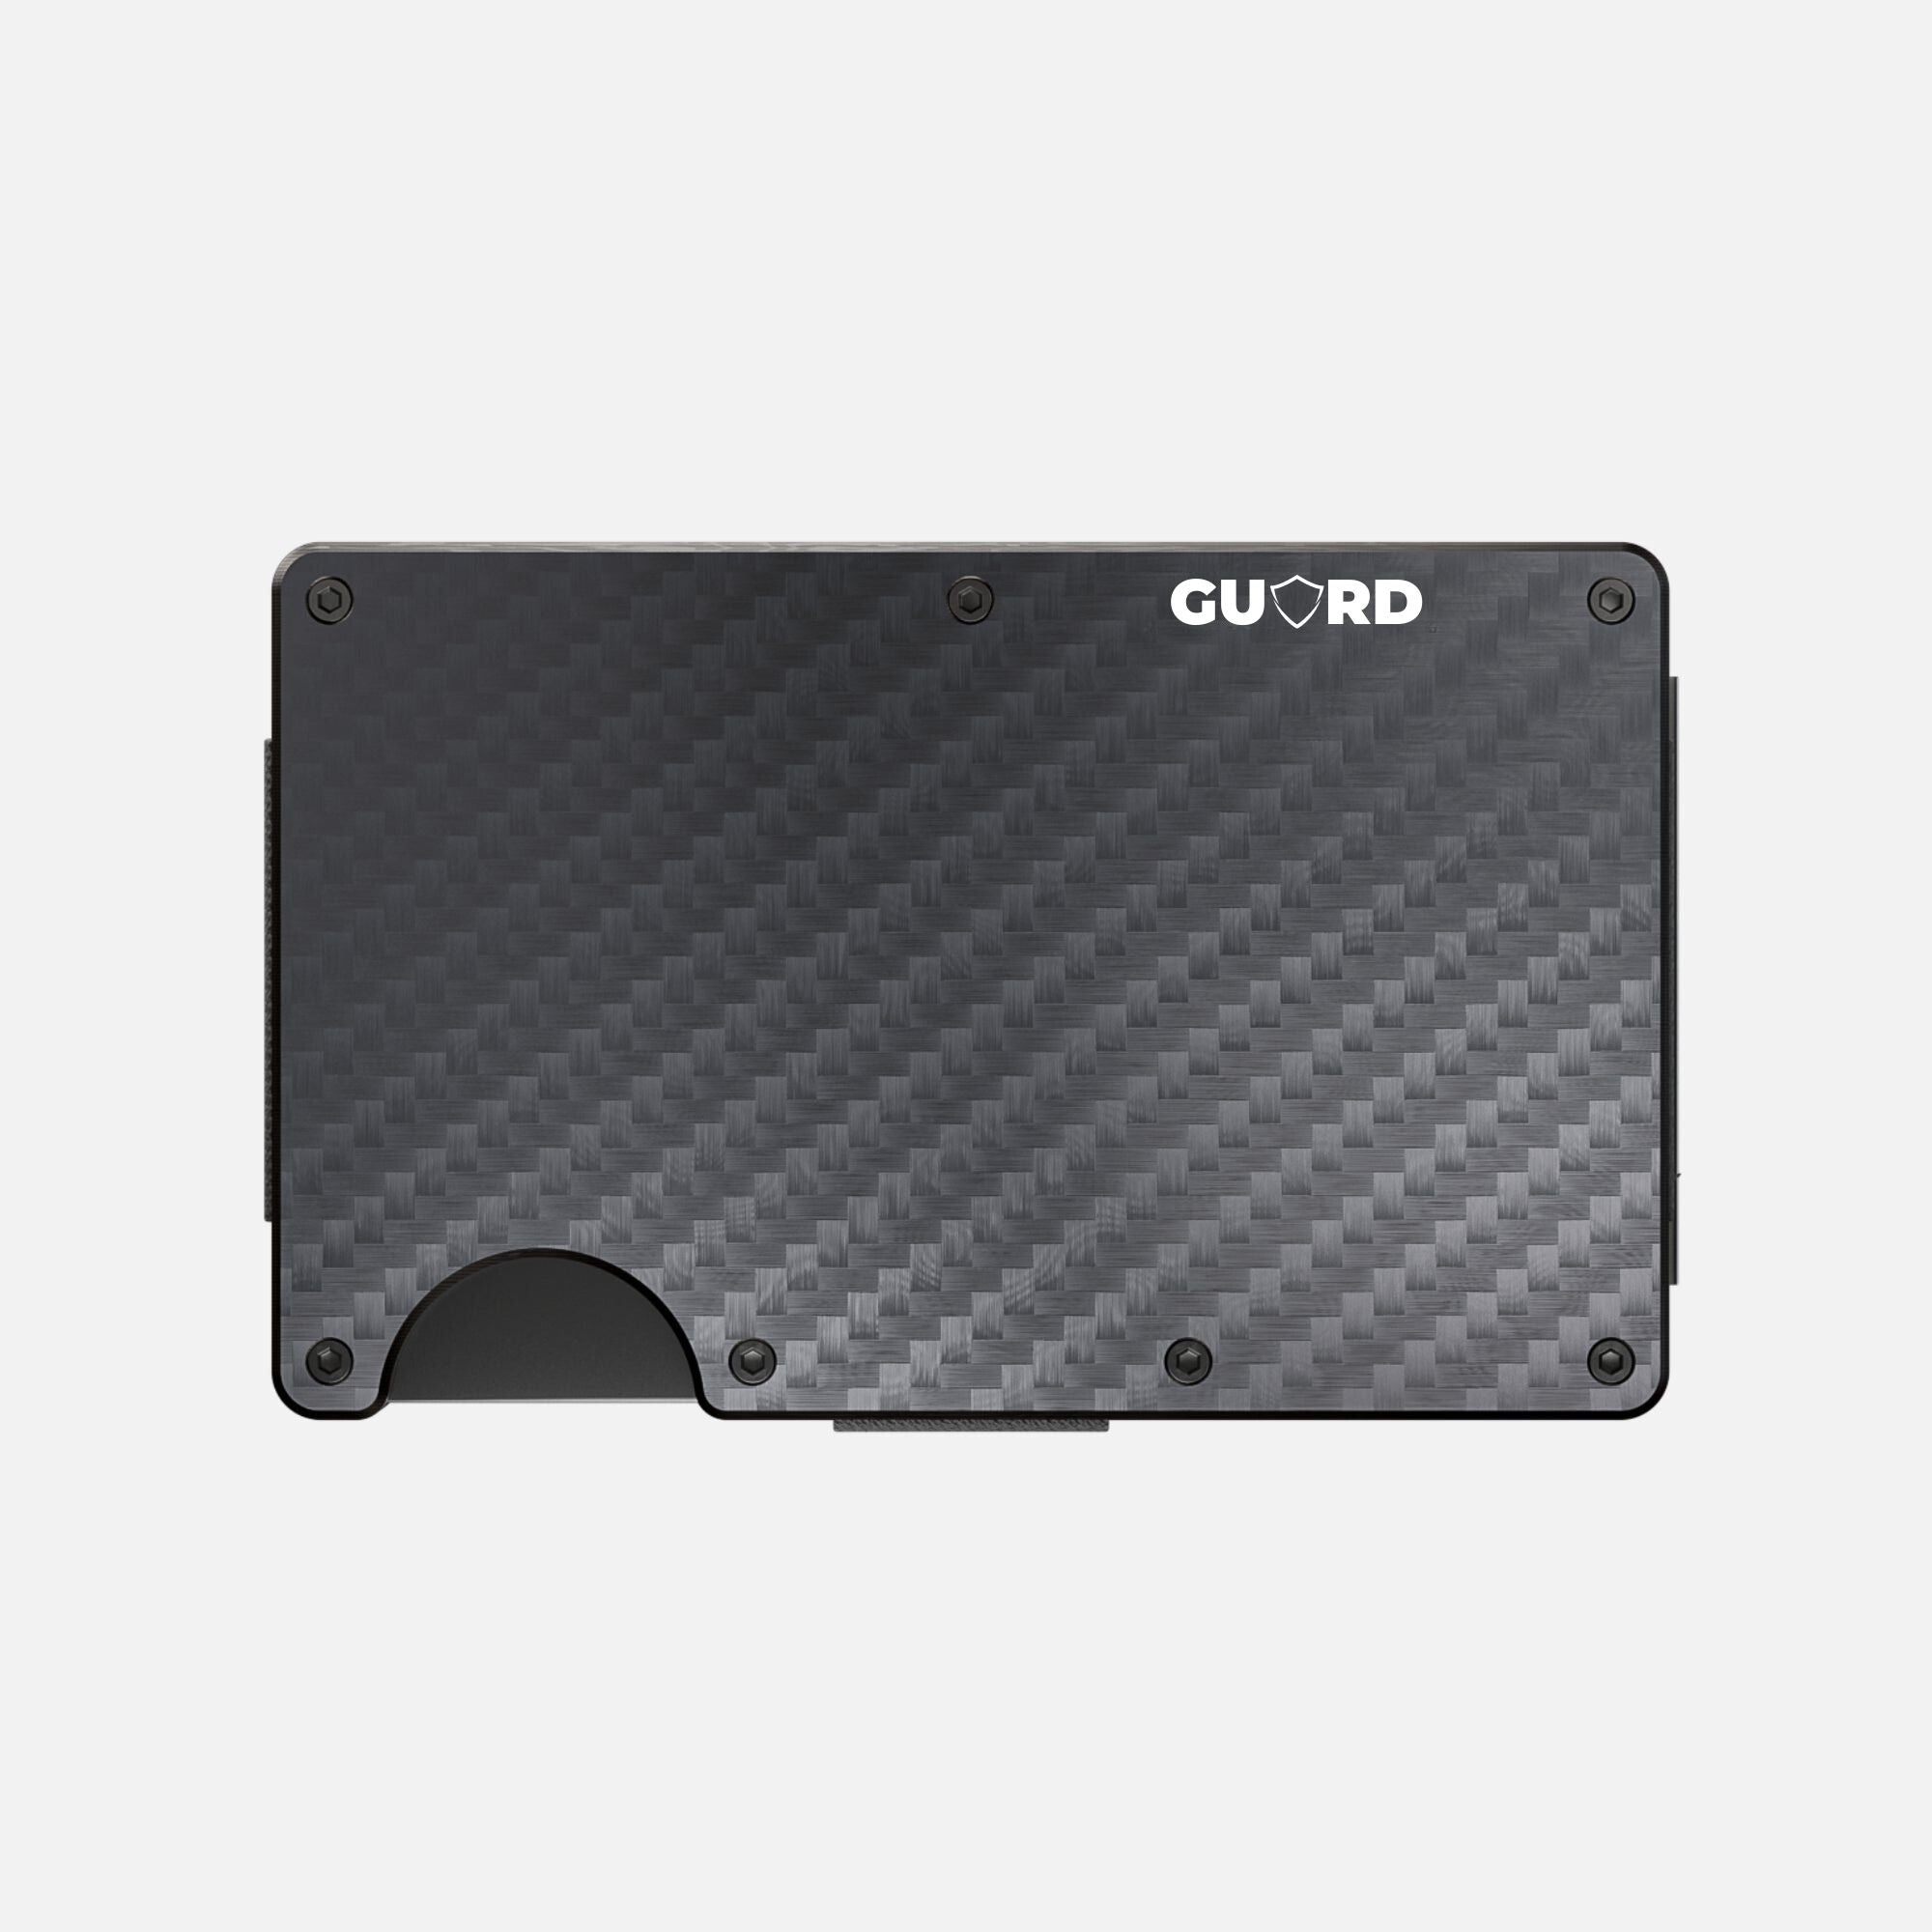 The Guard Wallet